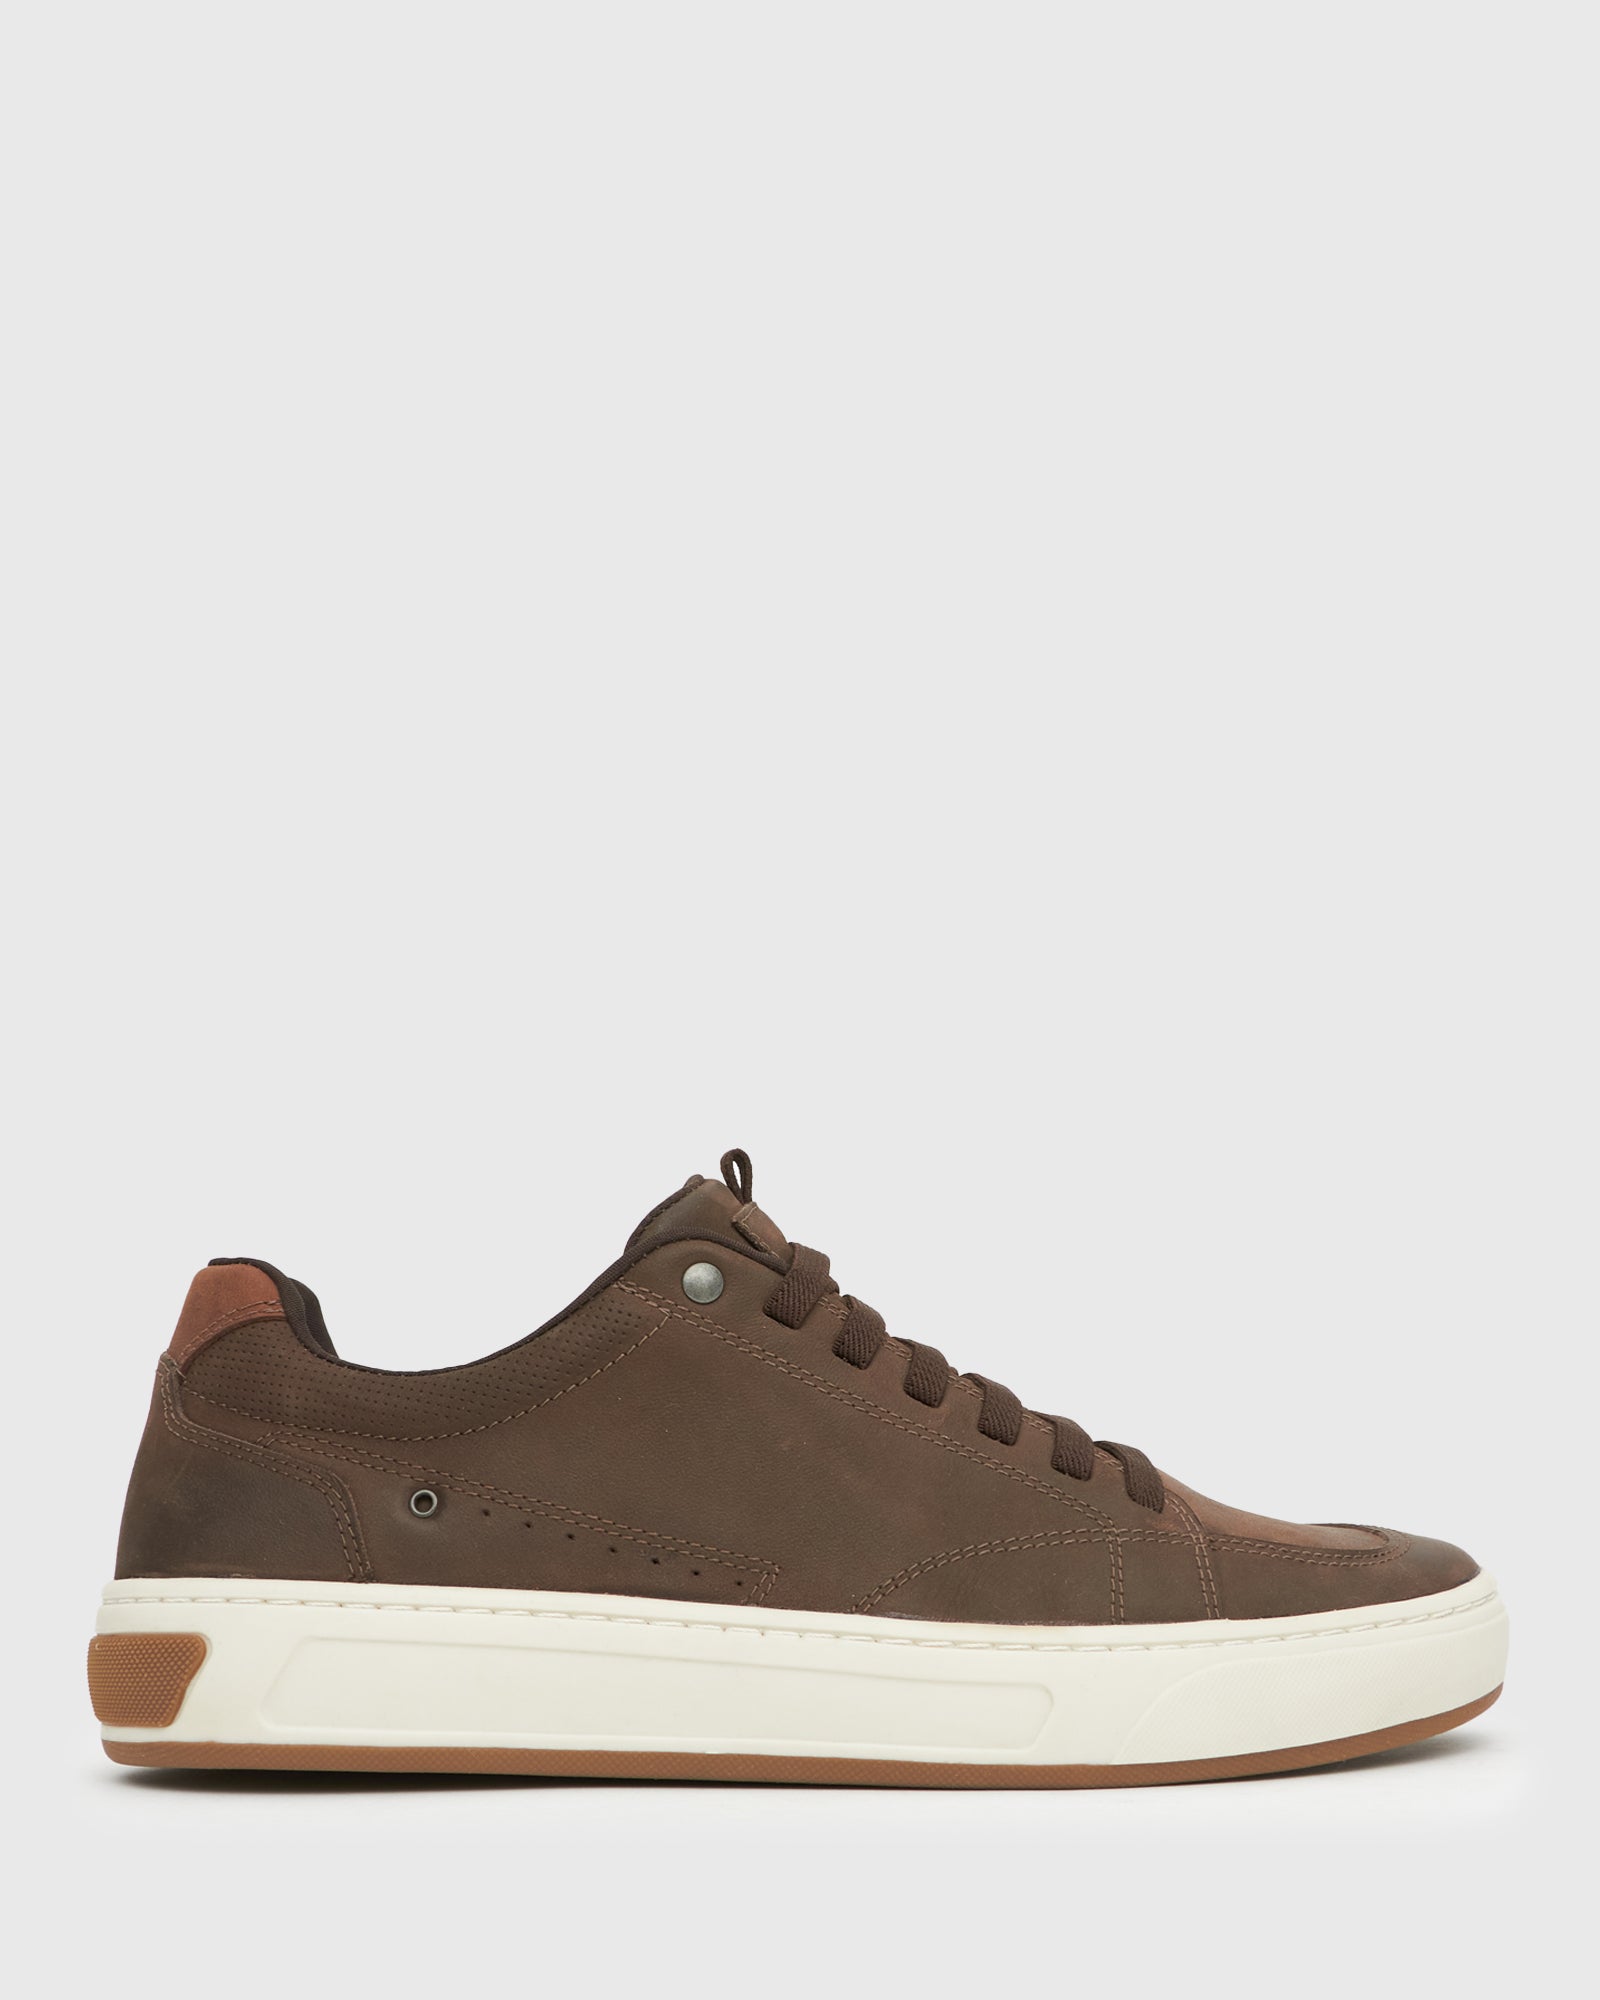 Buy KAYDEN Low Top Casual Shoes by Airflex online - Betts